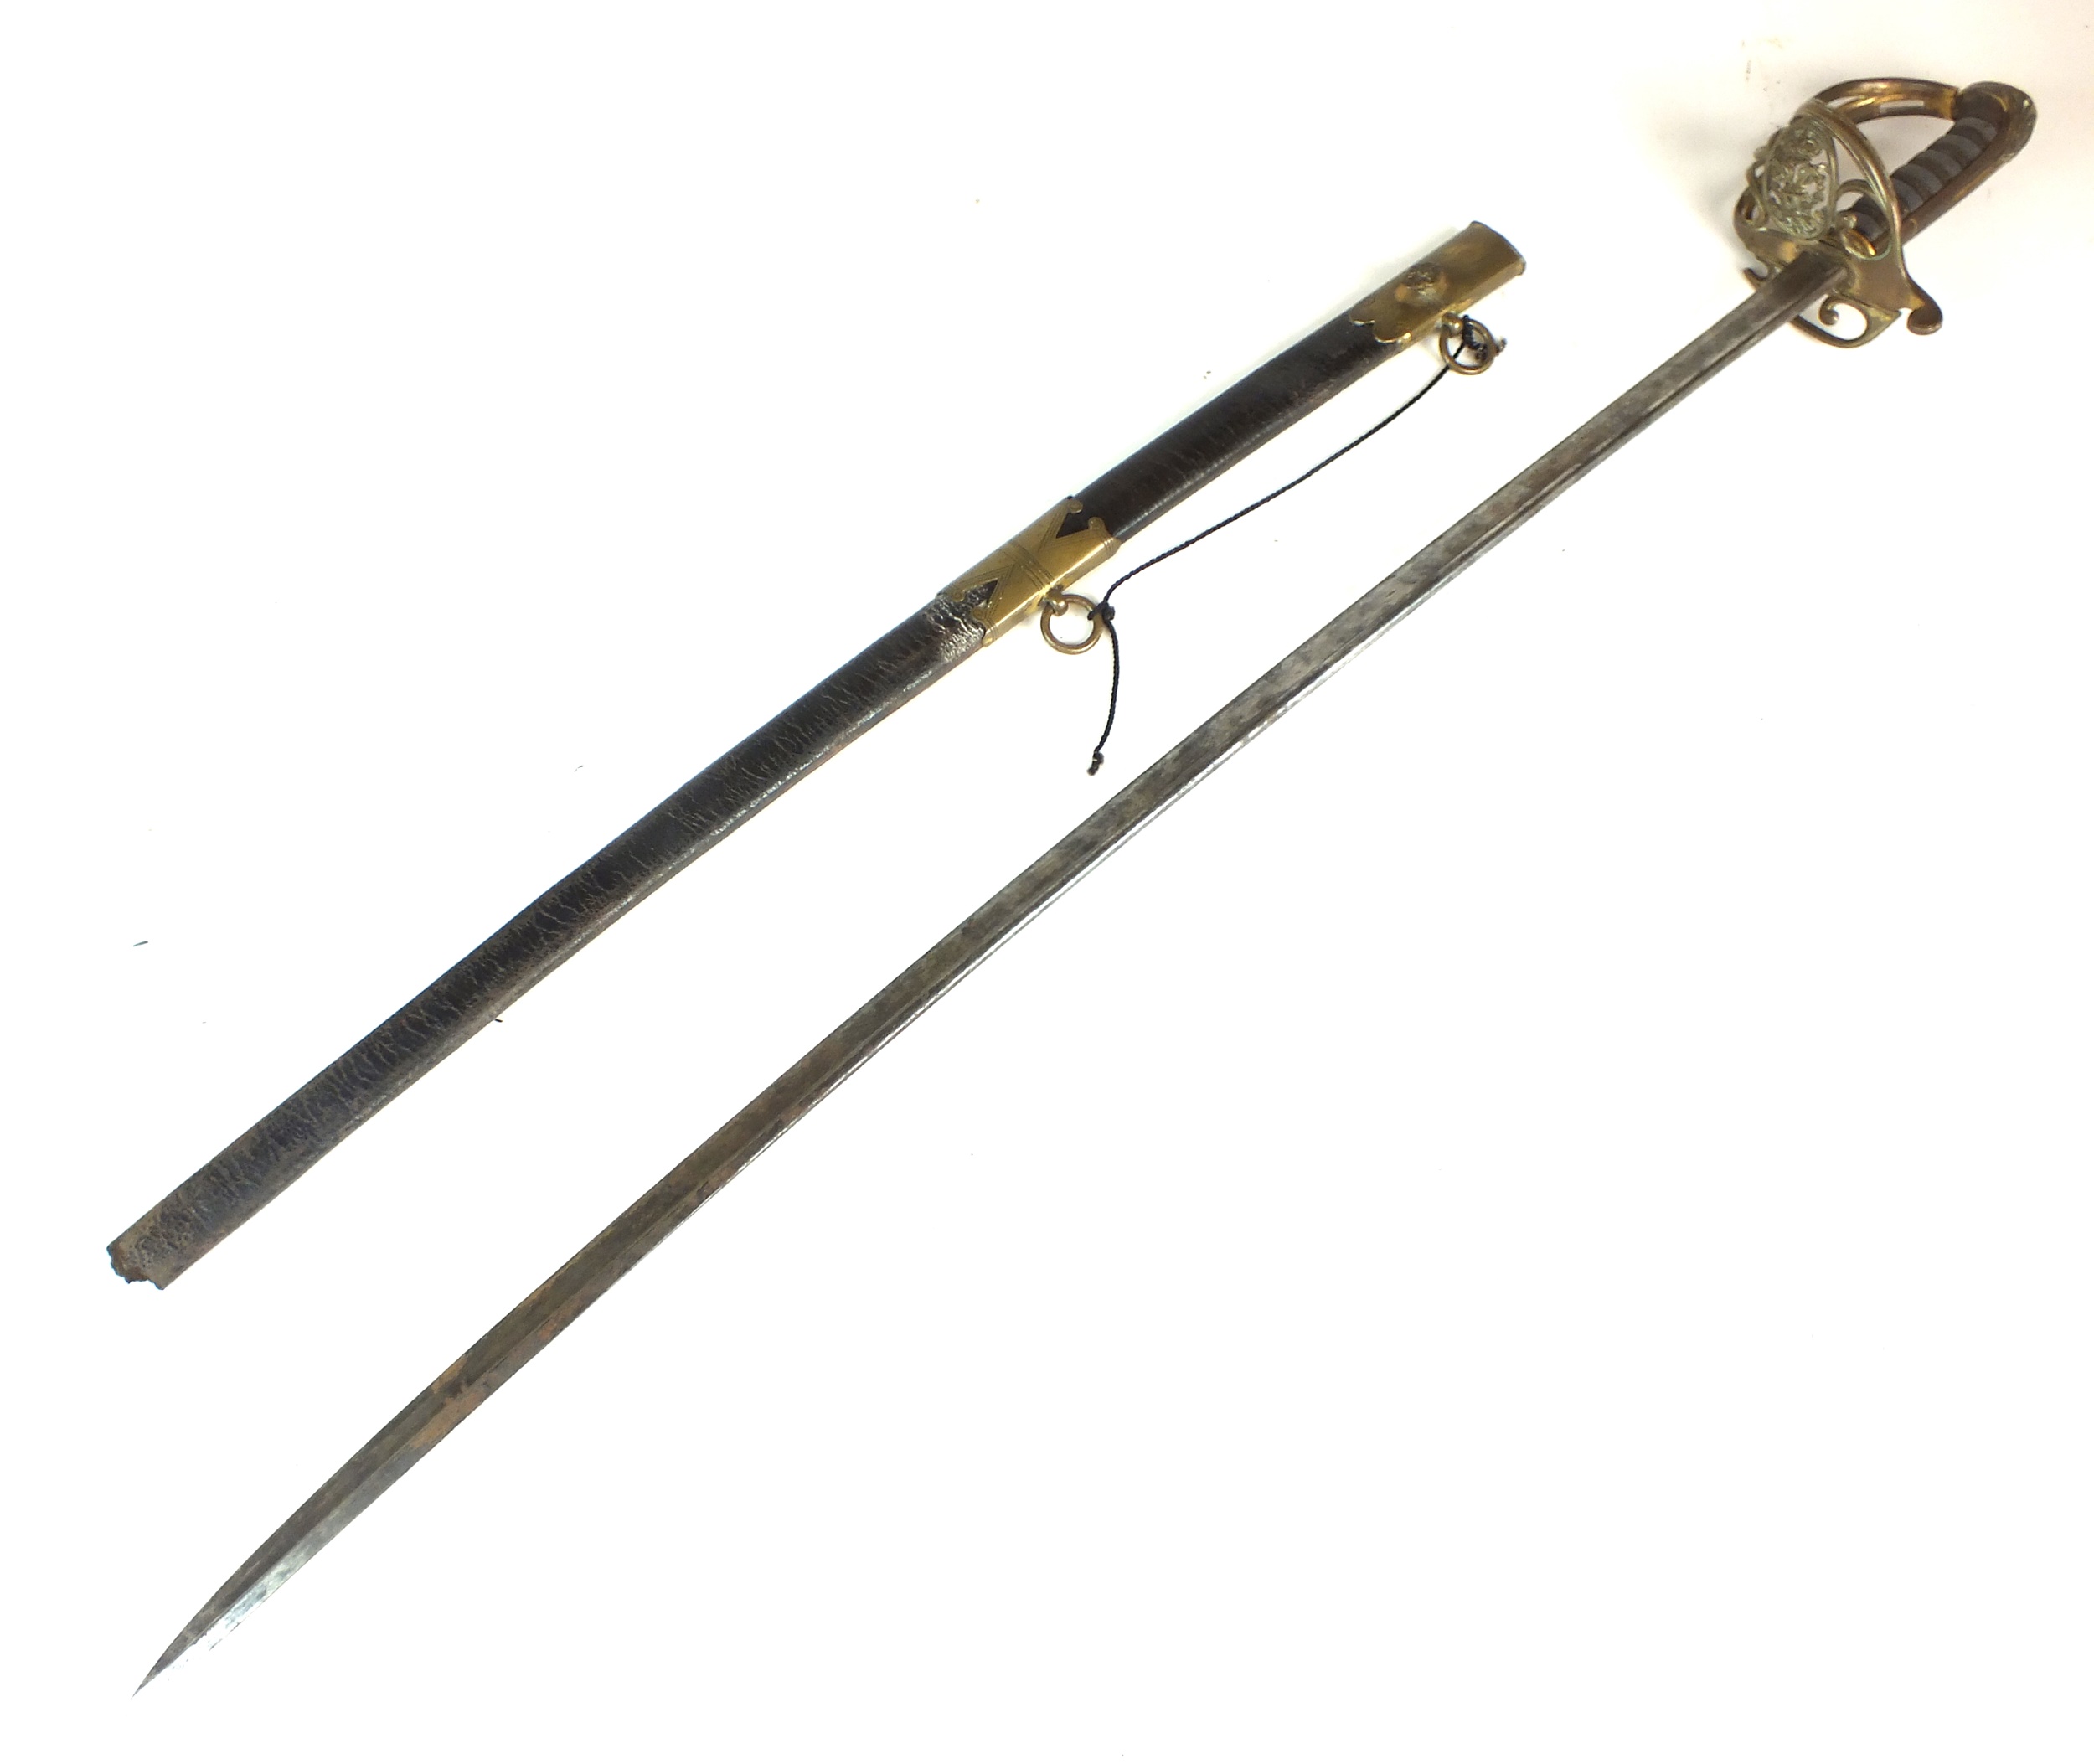 A British 1822 pattern George IV officer's sword